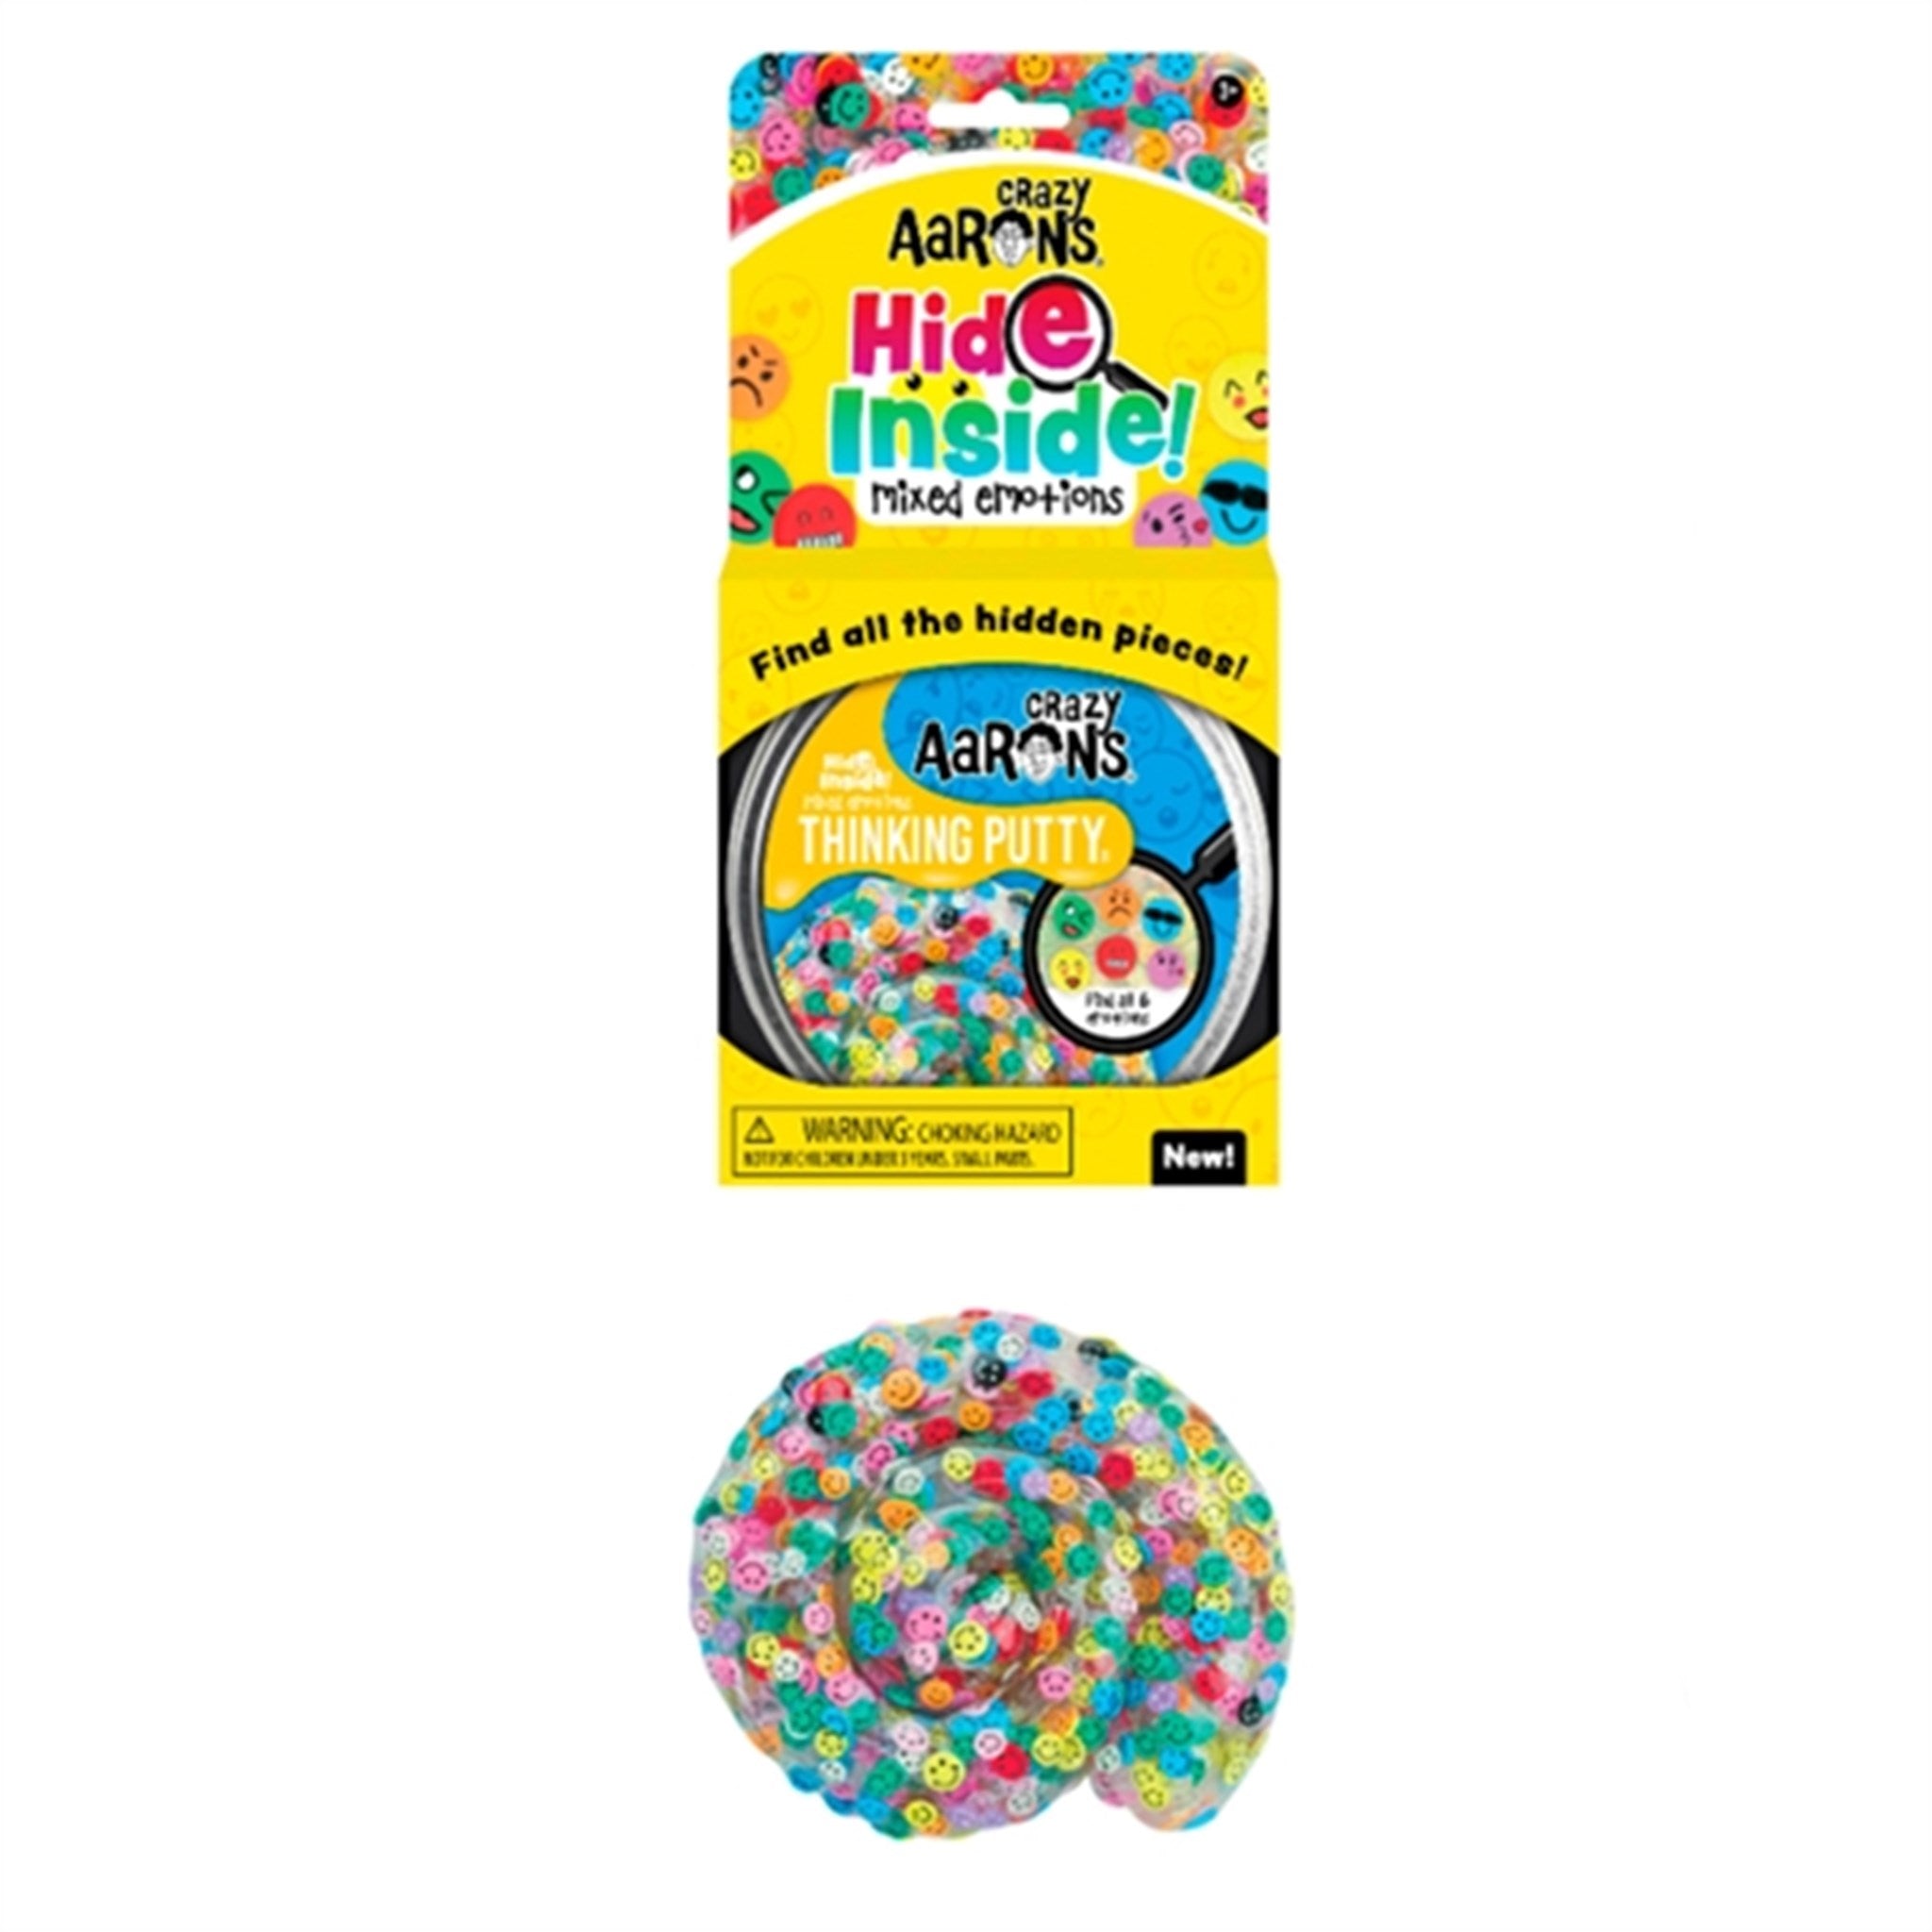 Crazy Aaron's® Slim - Thinking Putty Hide Inside! - Mixed Emotions